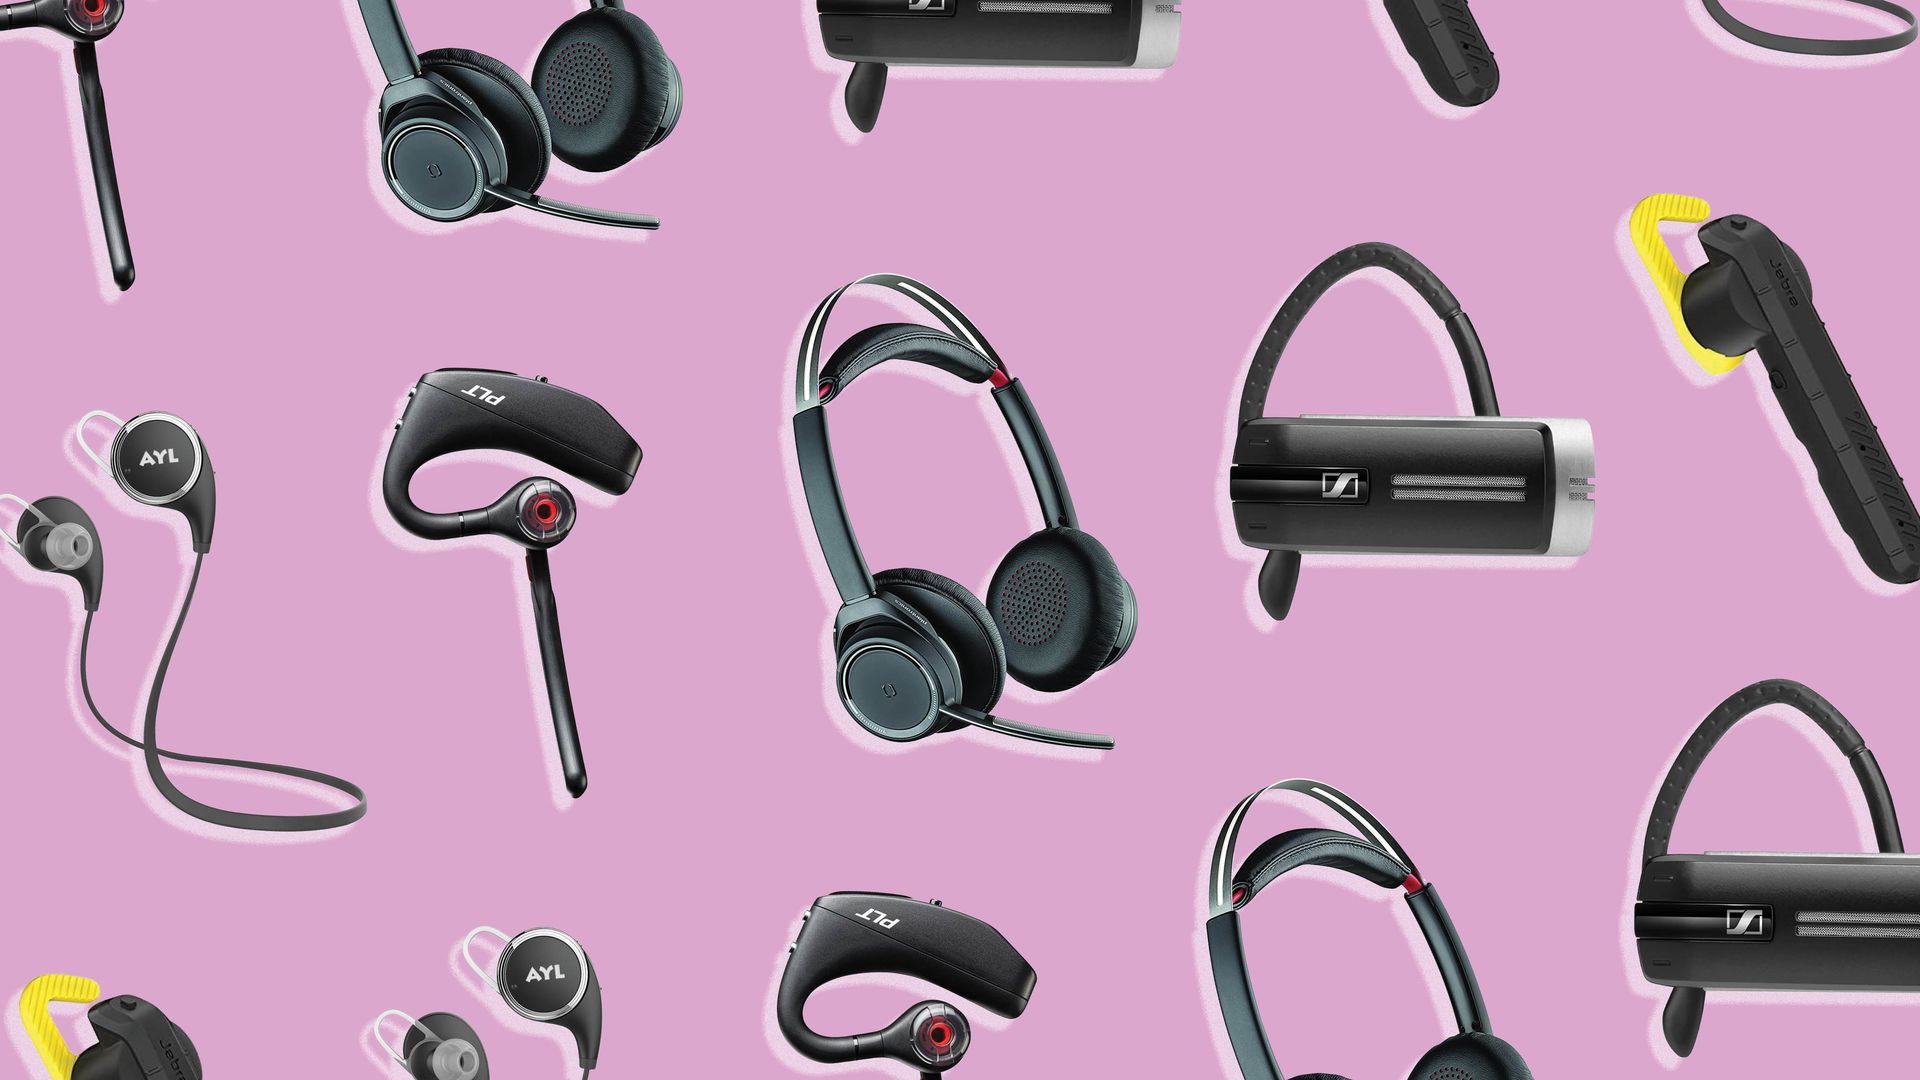 Headphones, Headset, Audio equipment, Gadget, Technology, Pink, Electronic device, Material property, Ear, Peripheral, 